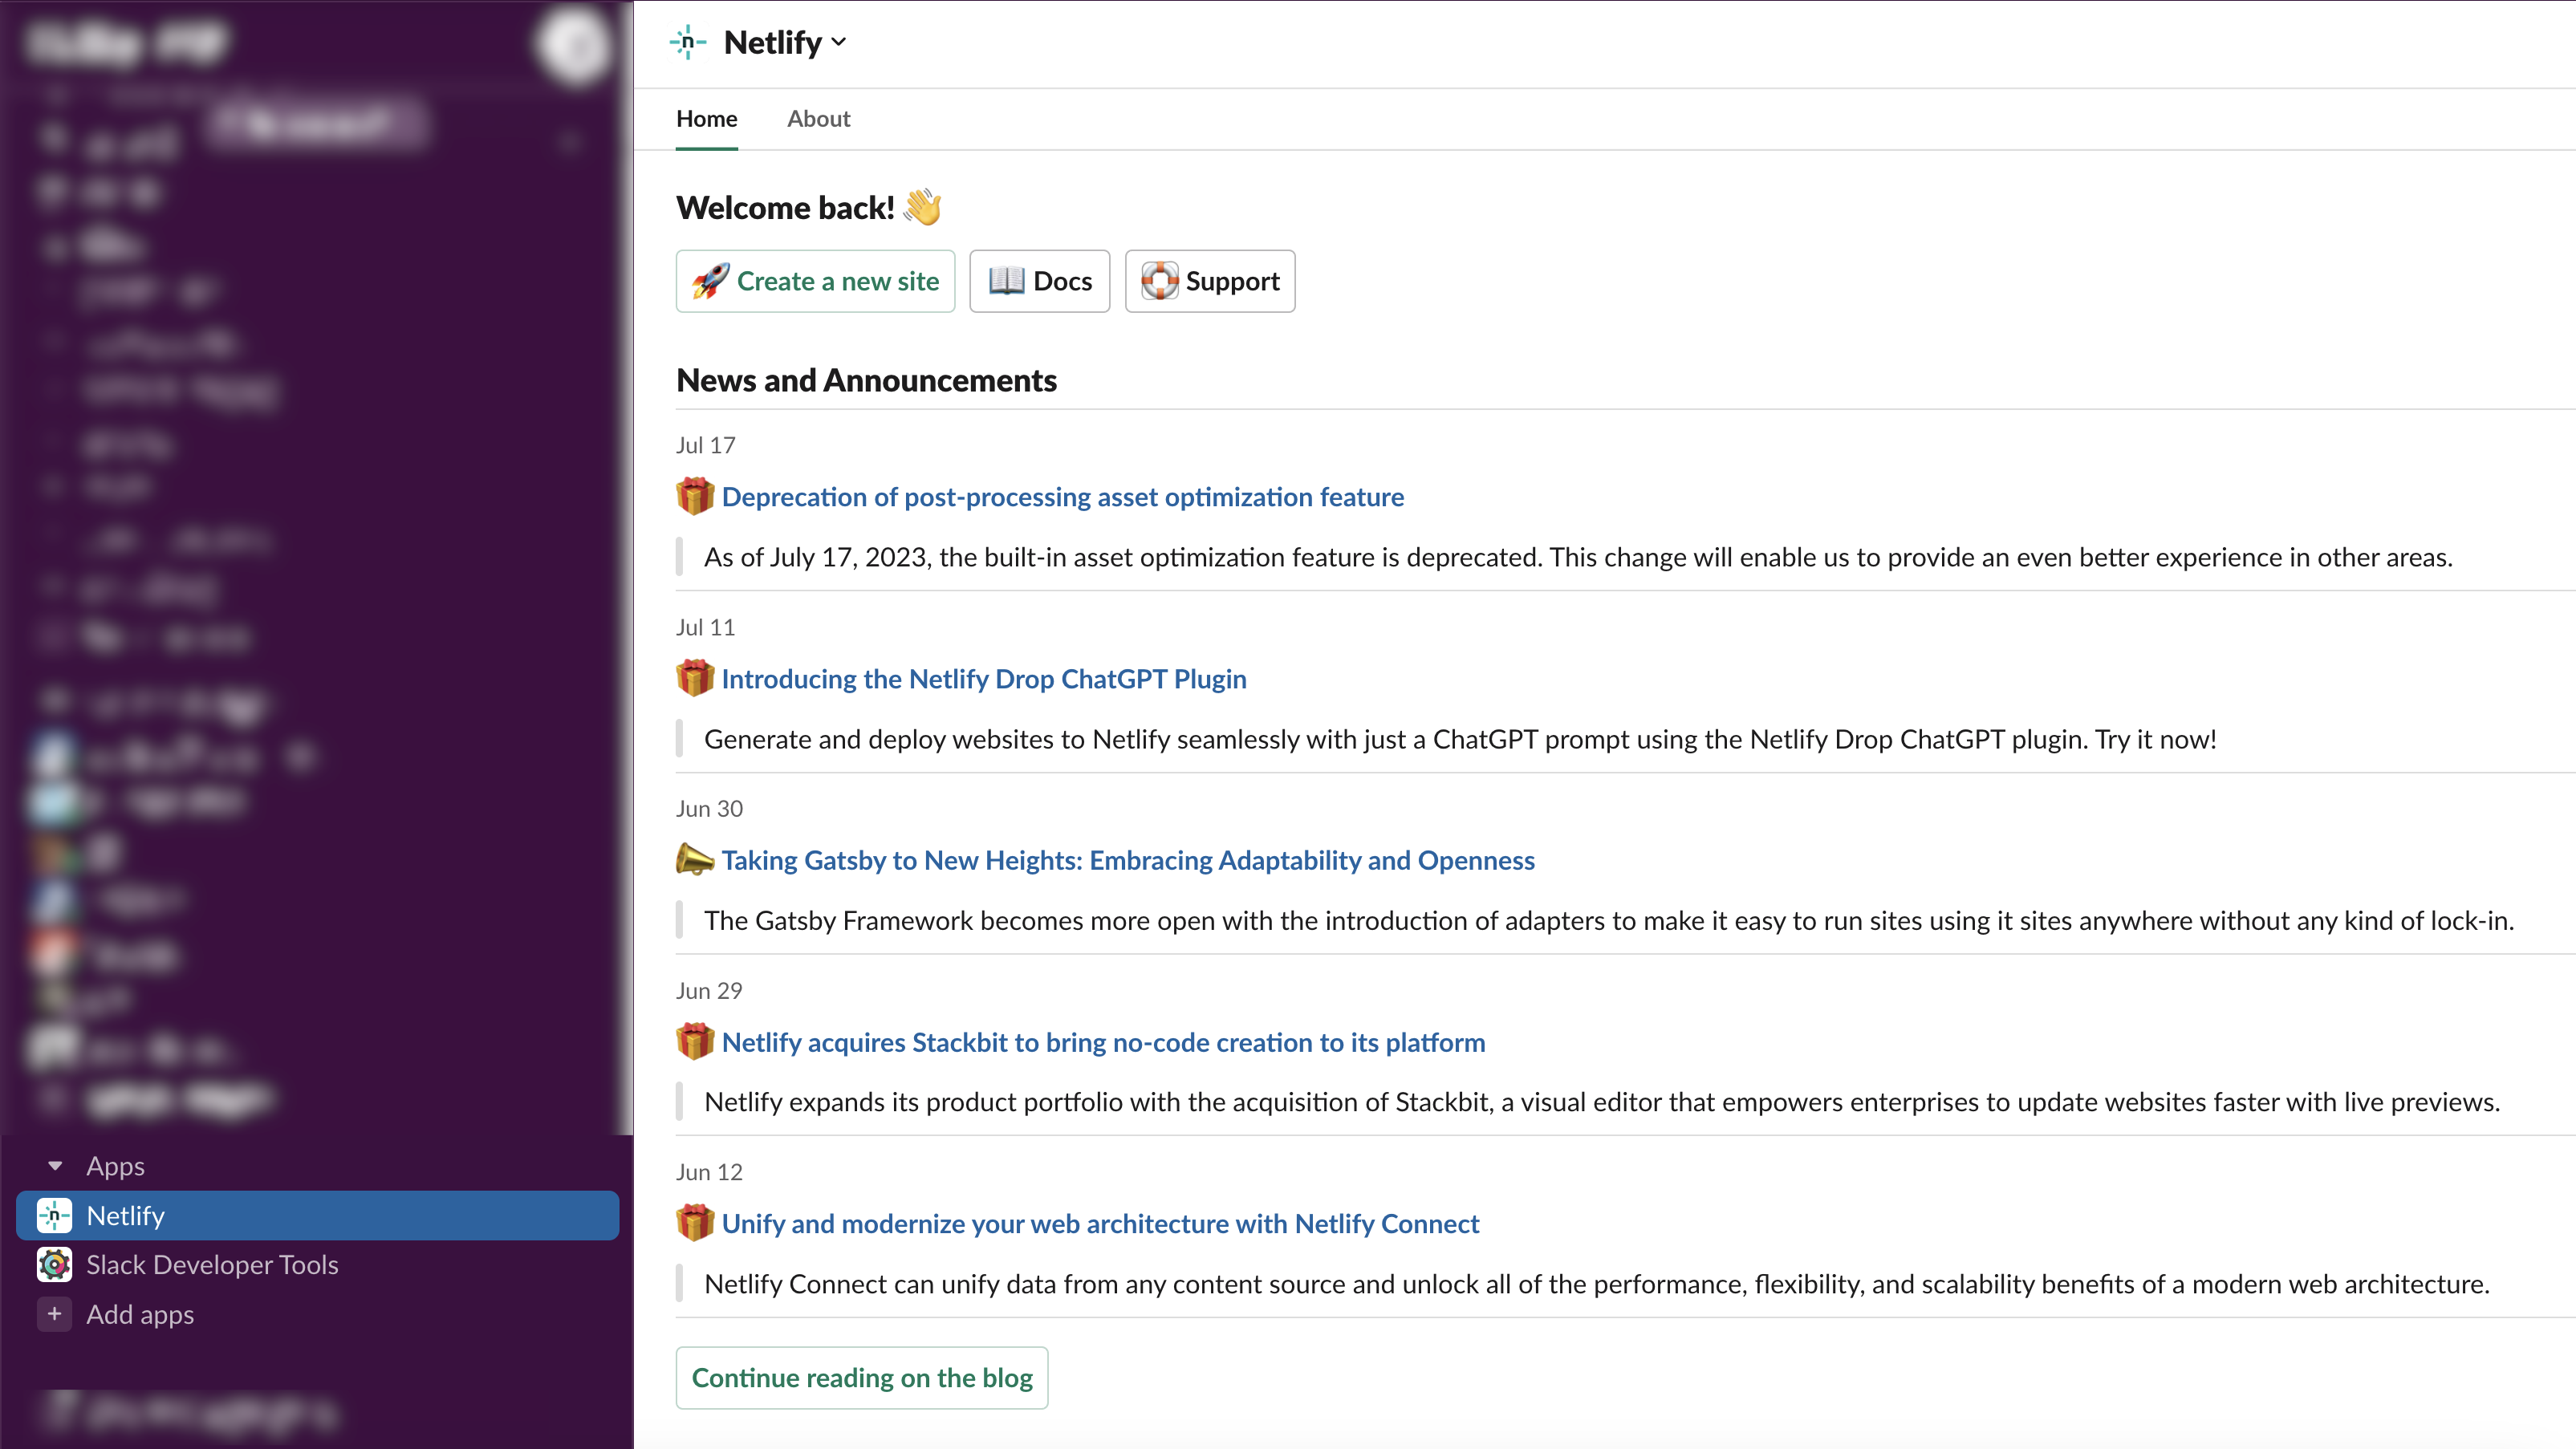 Slack app window showing the Netlify App selected with a list of Netlify product updates